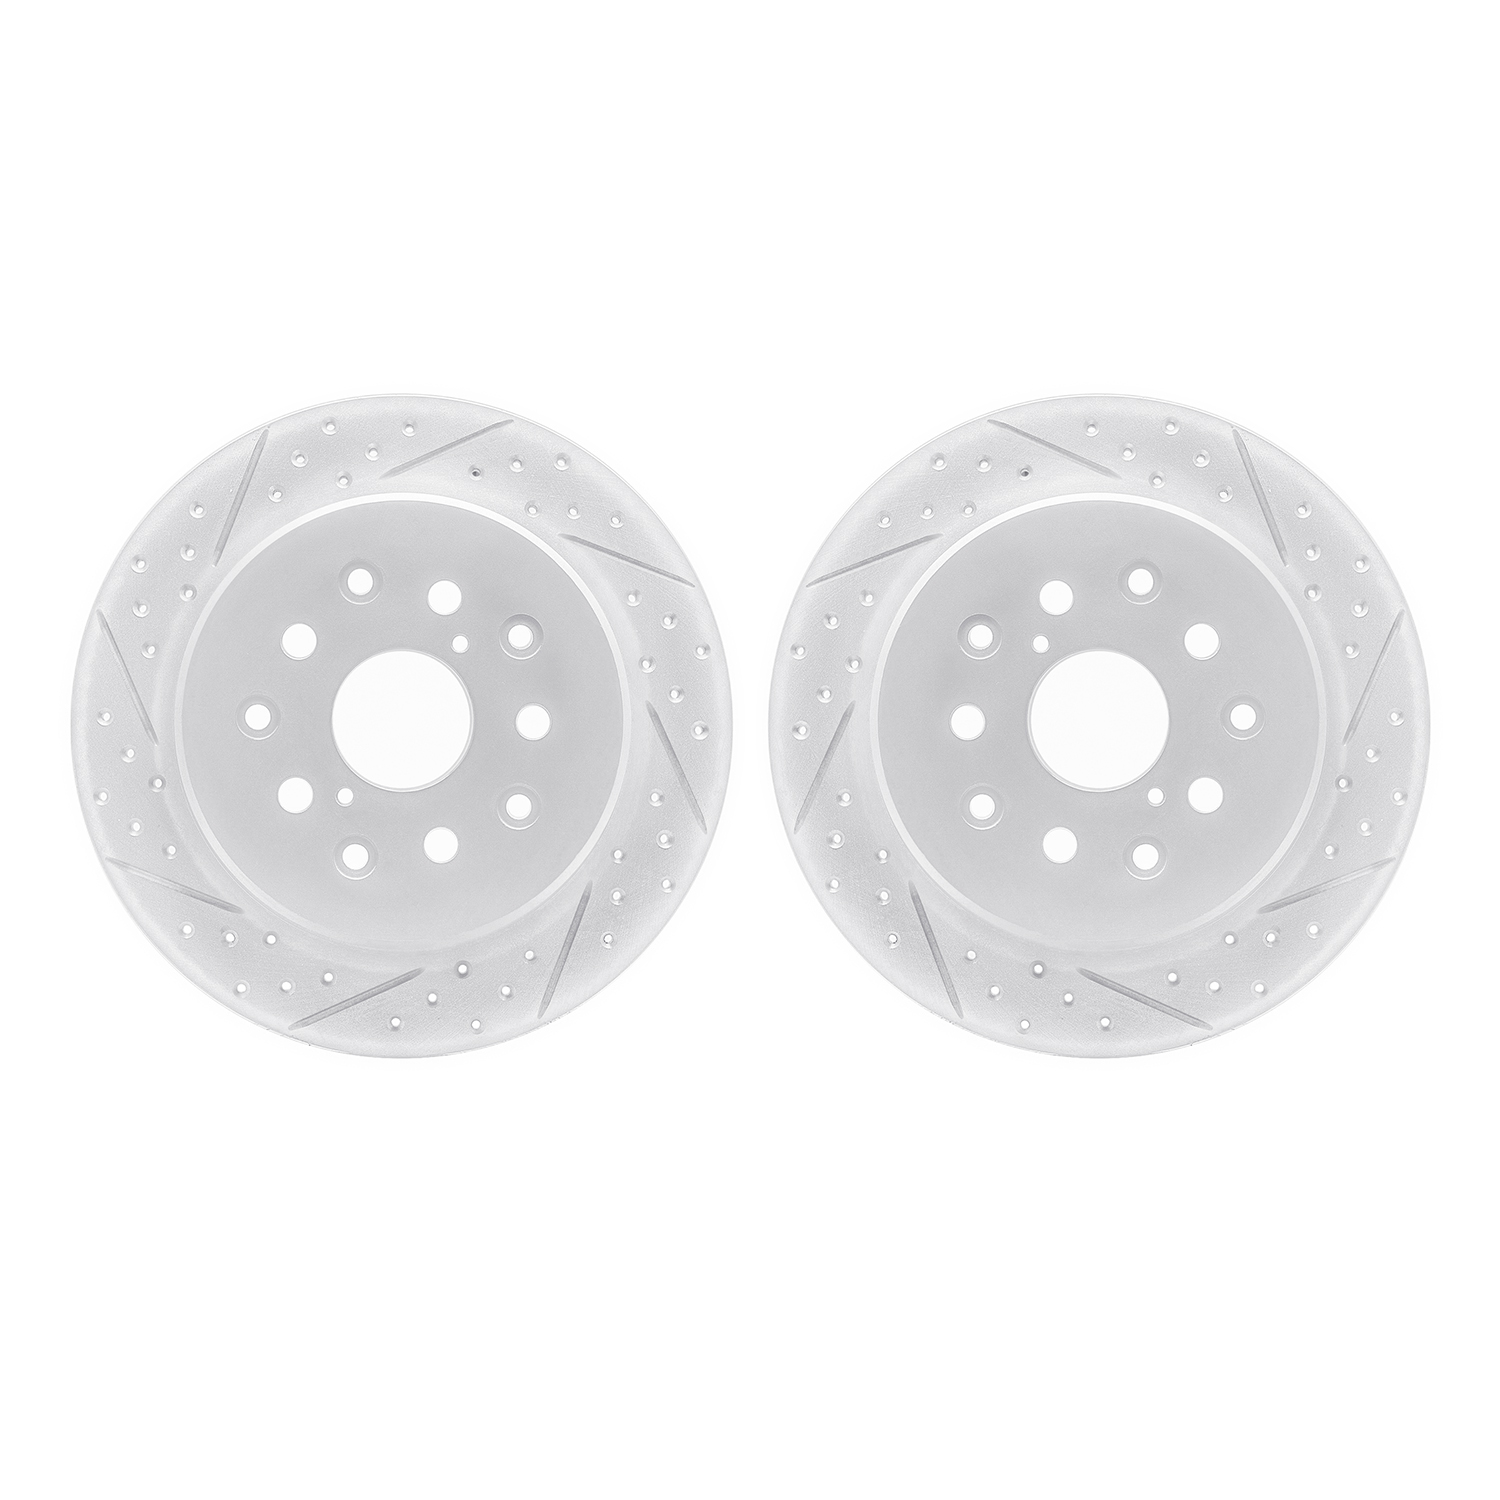 2002-75019 Geoperformance Drilled/Slotted Brake Rotors, 1998-2010 Lexus/Toyota/Scion, Position: Rear